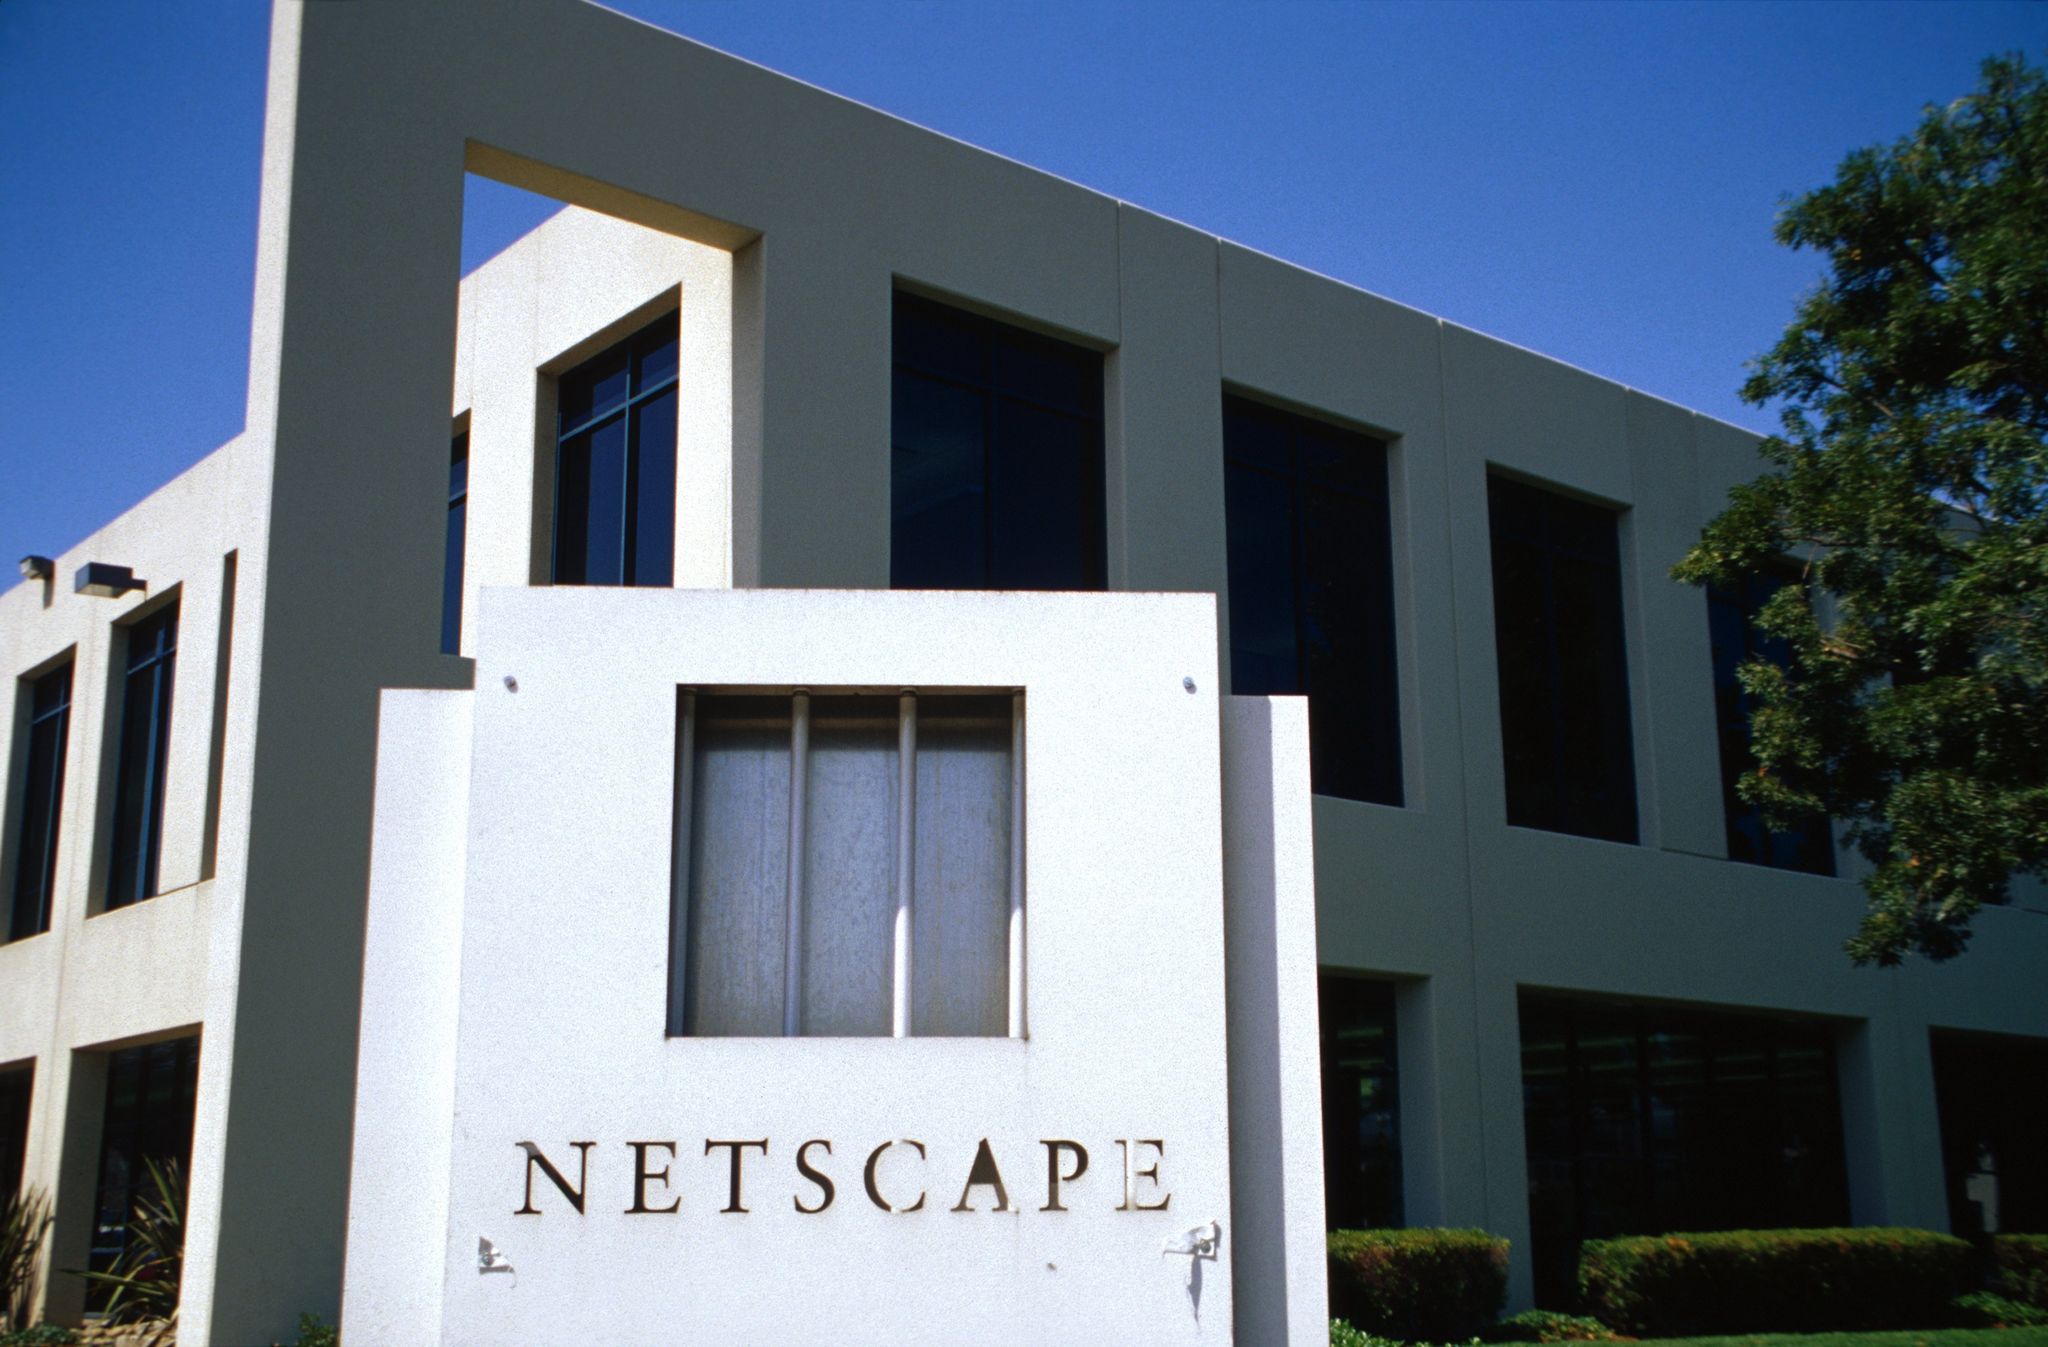 California, Mountain View, Netscape Sign In Disrepair In Silicon Valley